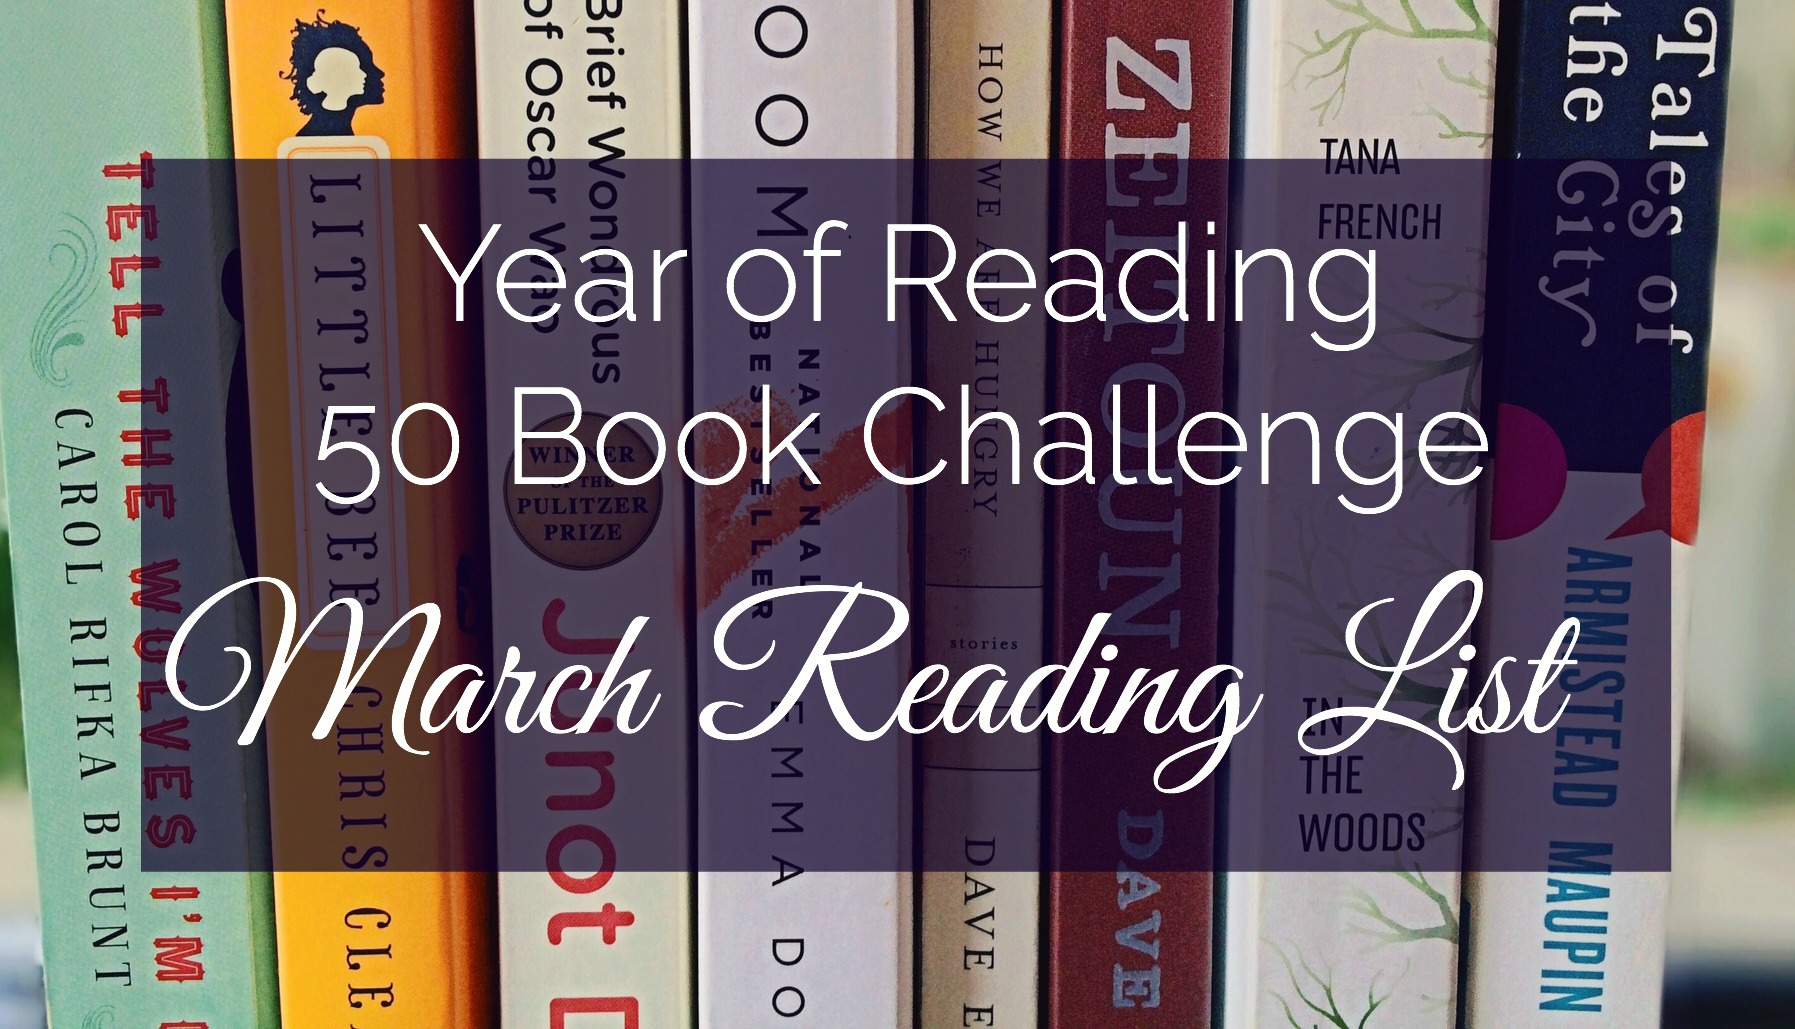 Can you finish the 50 book challenge? Follow along and see how many books you can read this year.